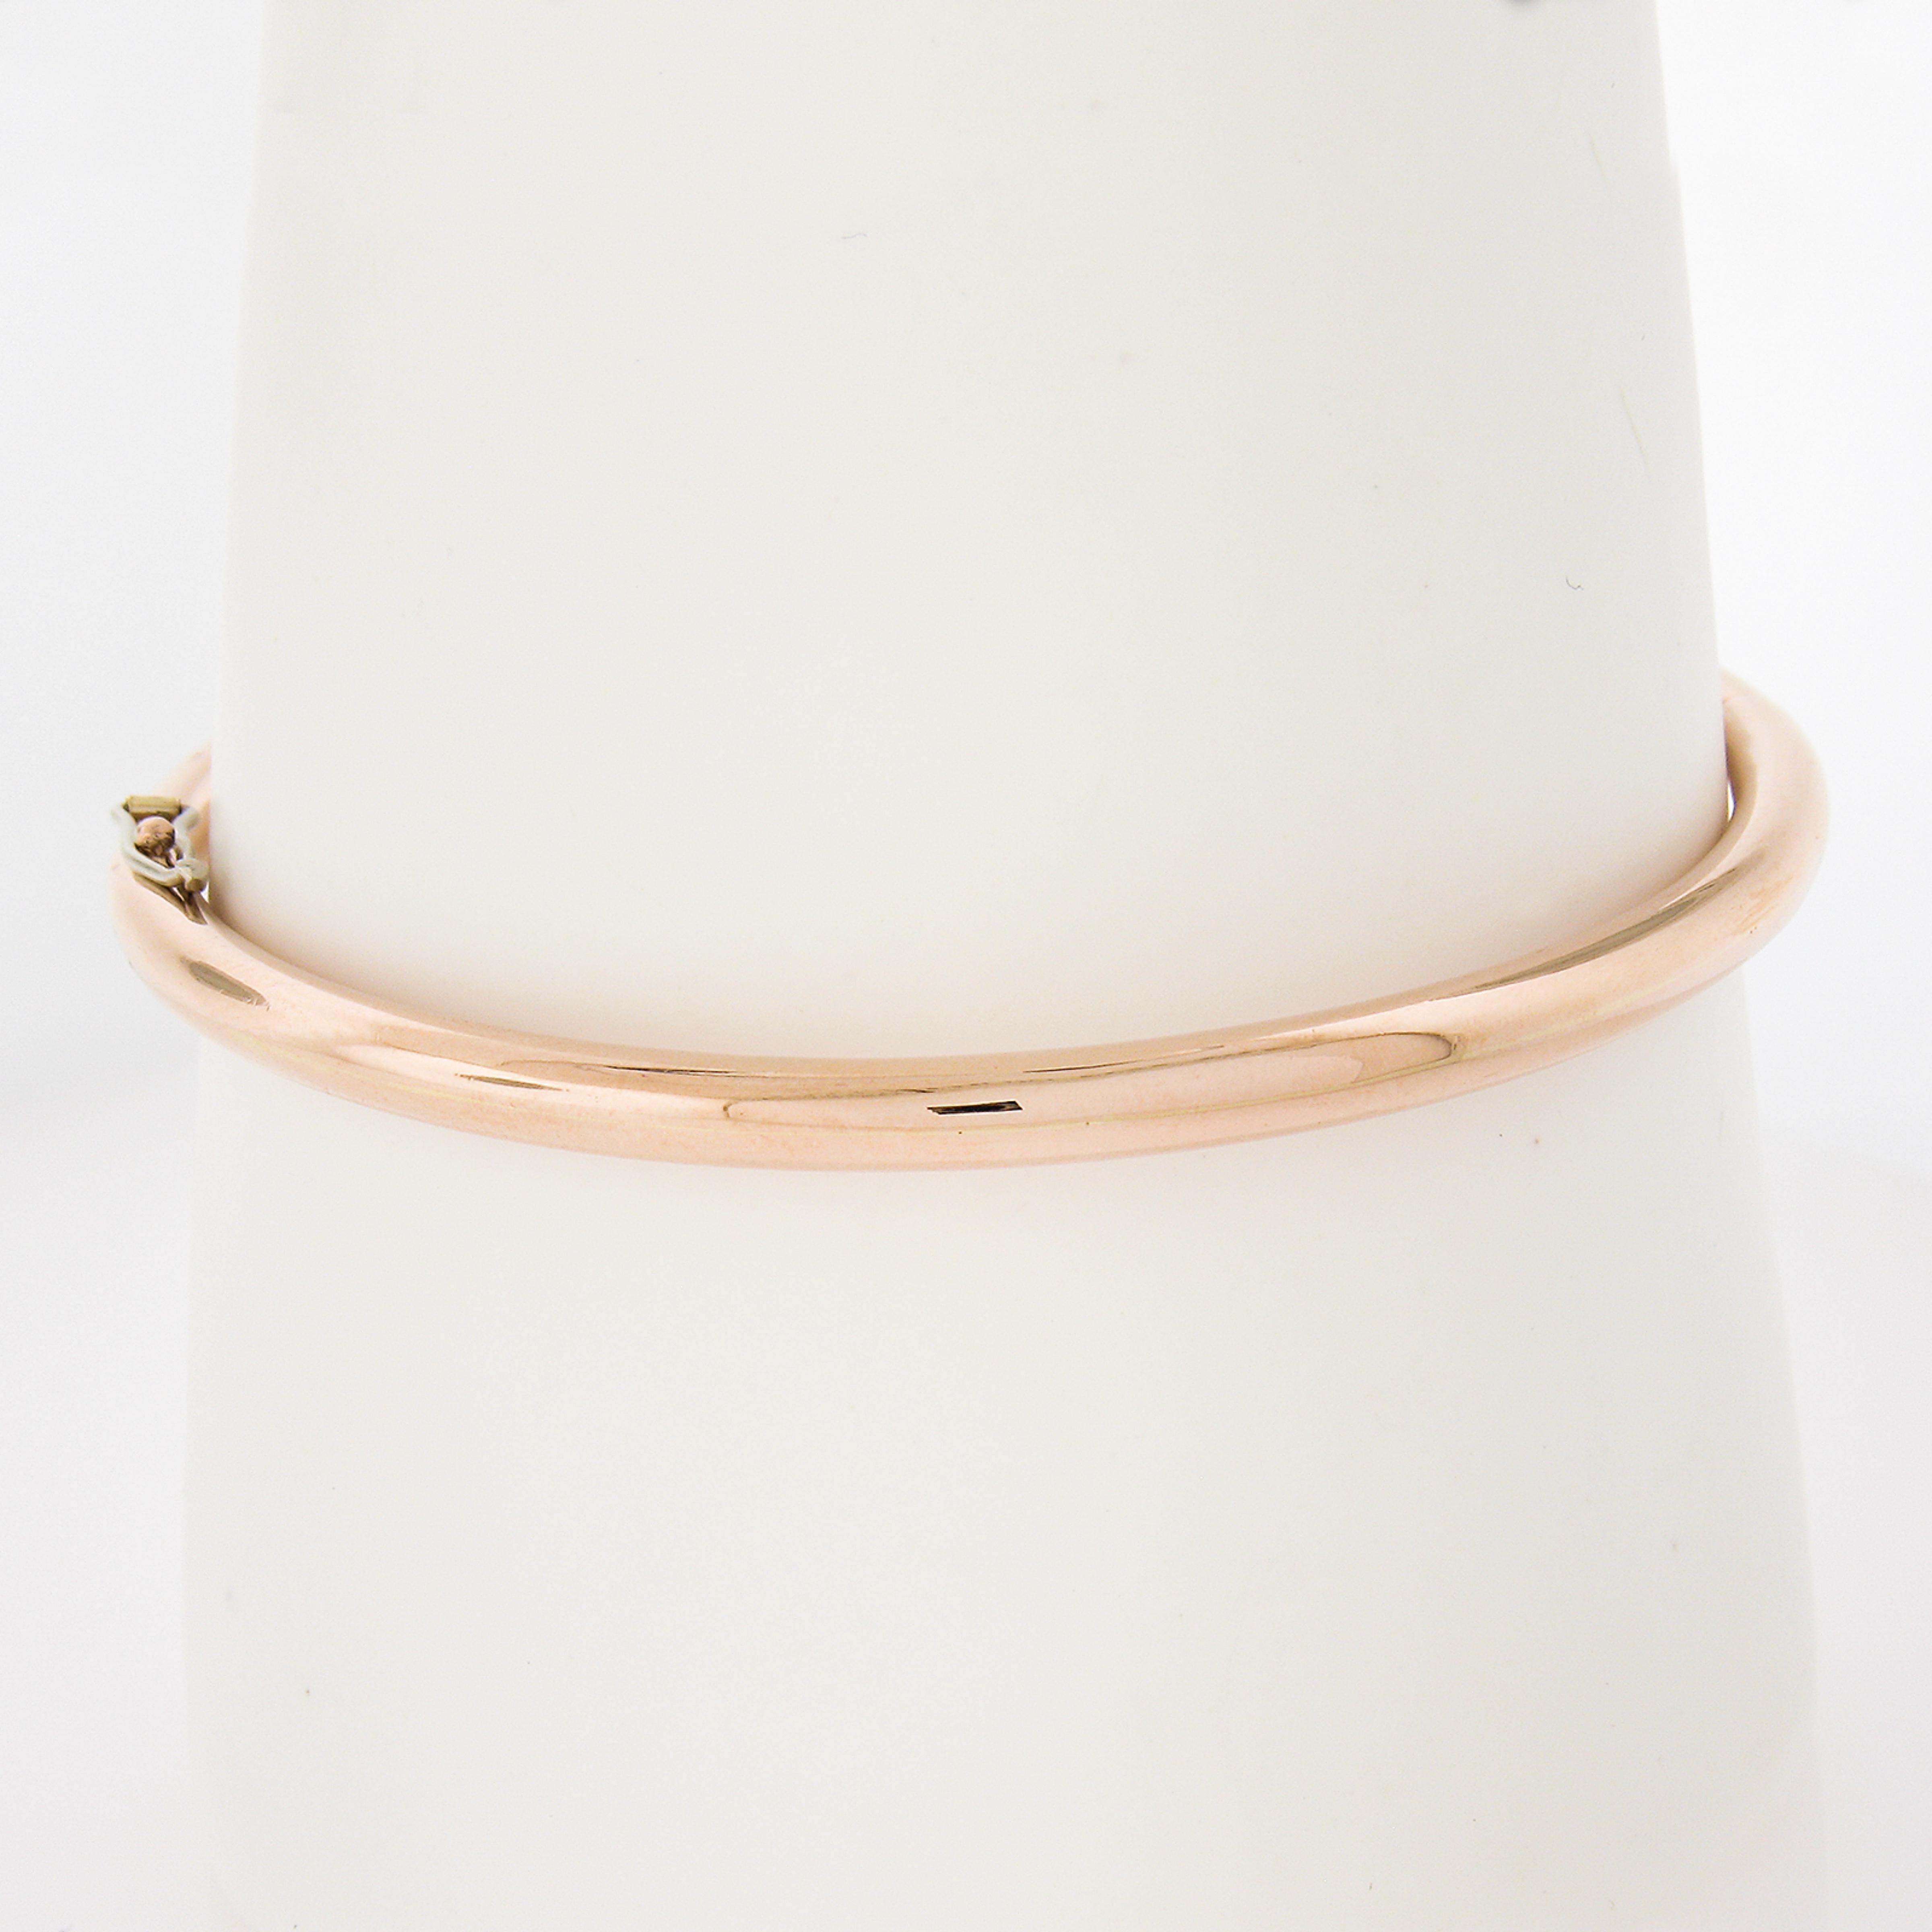 Material: Solid 14K Rose Gold
Weight: 20.10 Grams
Type: Hinged Open Bangle Bracelet
Length: Will comfortably fit up to a 7.25 inch wrist (Fitted on a wrist)
Clasp: Push Clasp w/ Safety Latch
Width: 3.7mm 
Thickness: 3.6mm rise off the